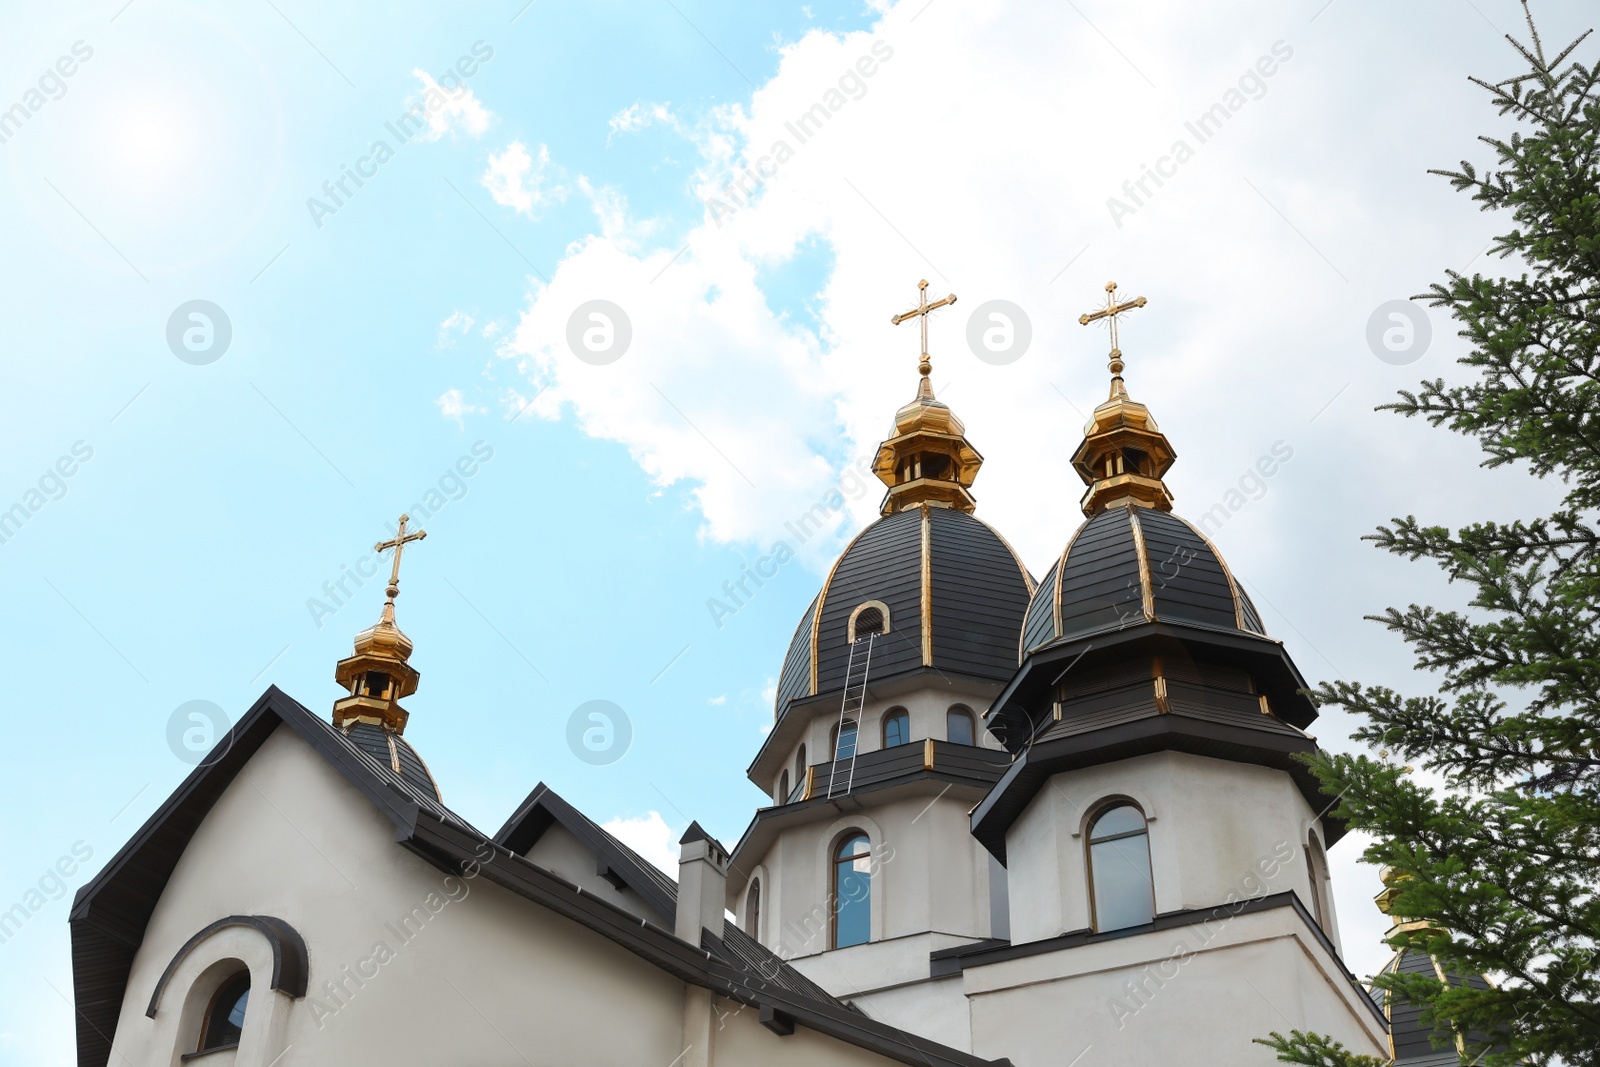 Photo of Beautiful church with golden domes against cloudy sky